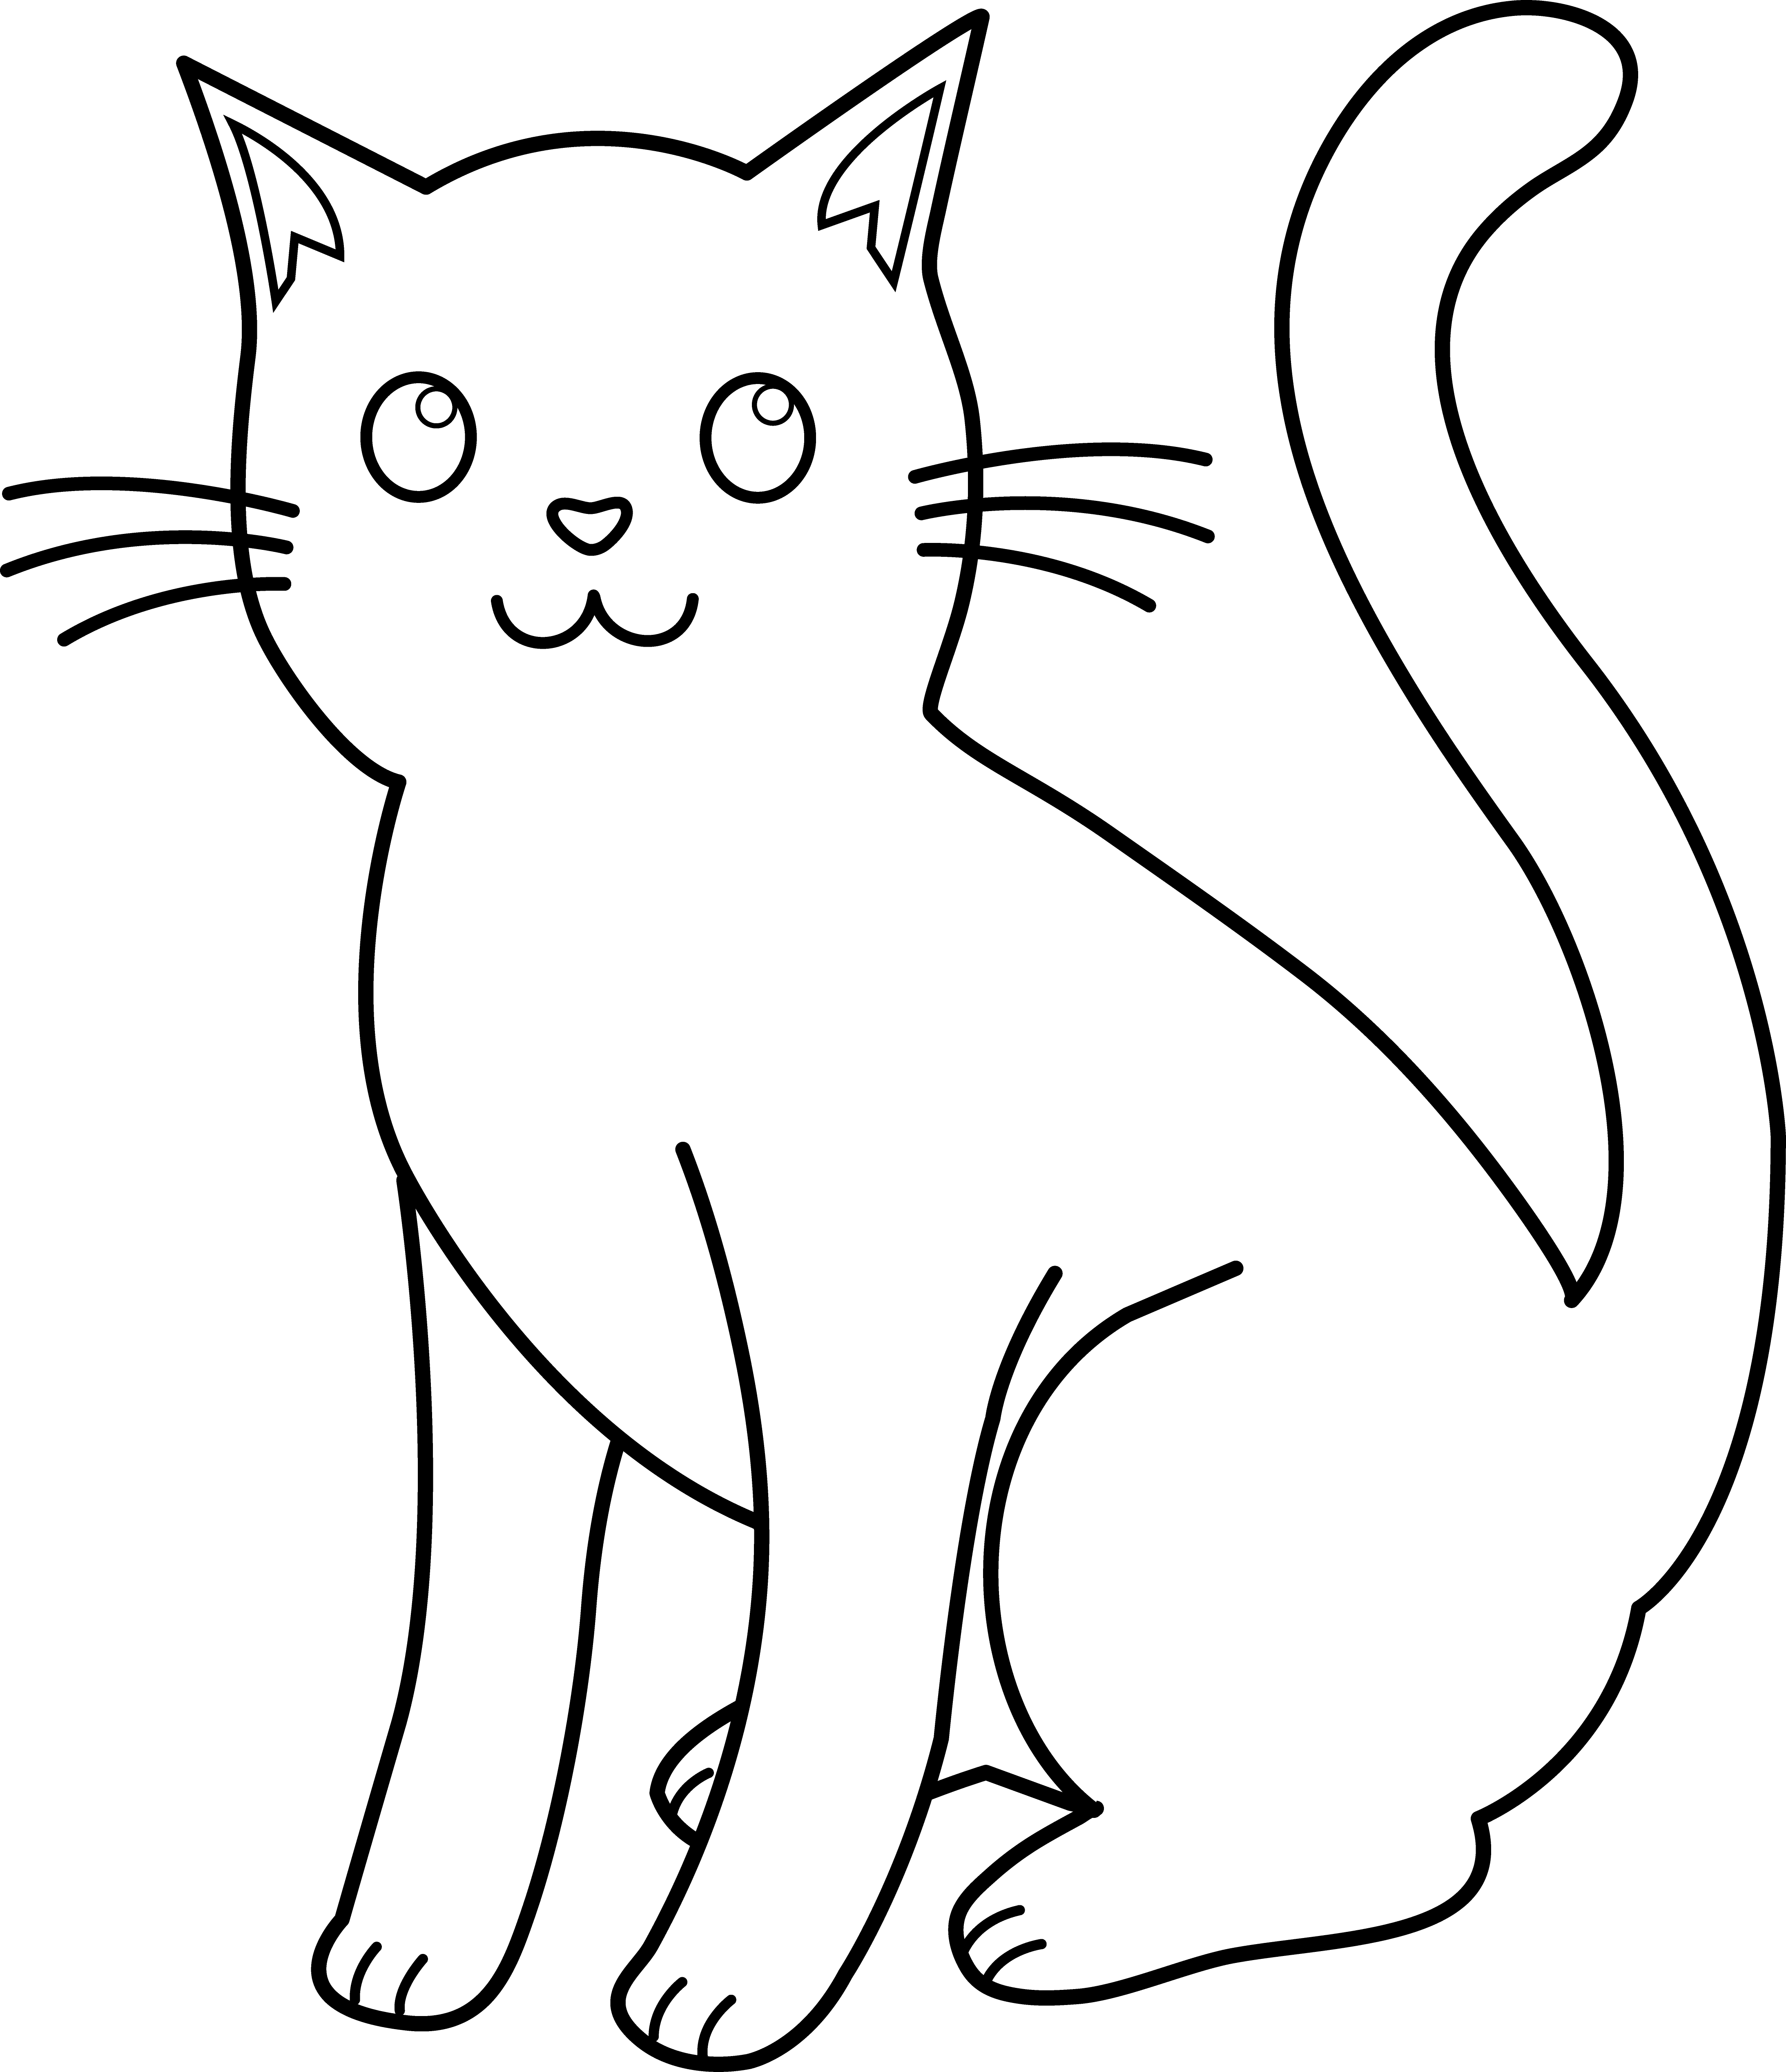 free-outline-of-cat-download-free-outline-of-cat-png-images-free